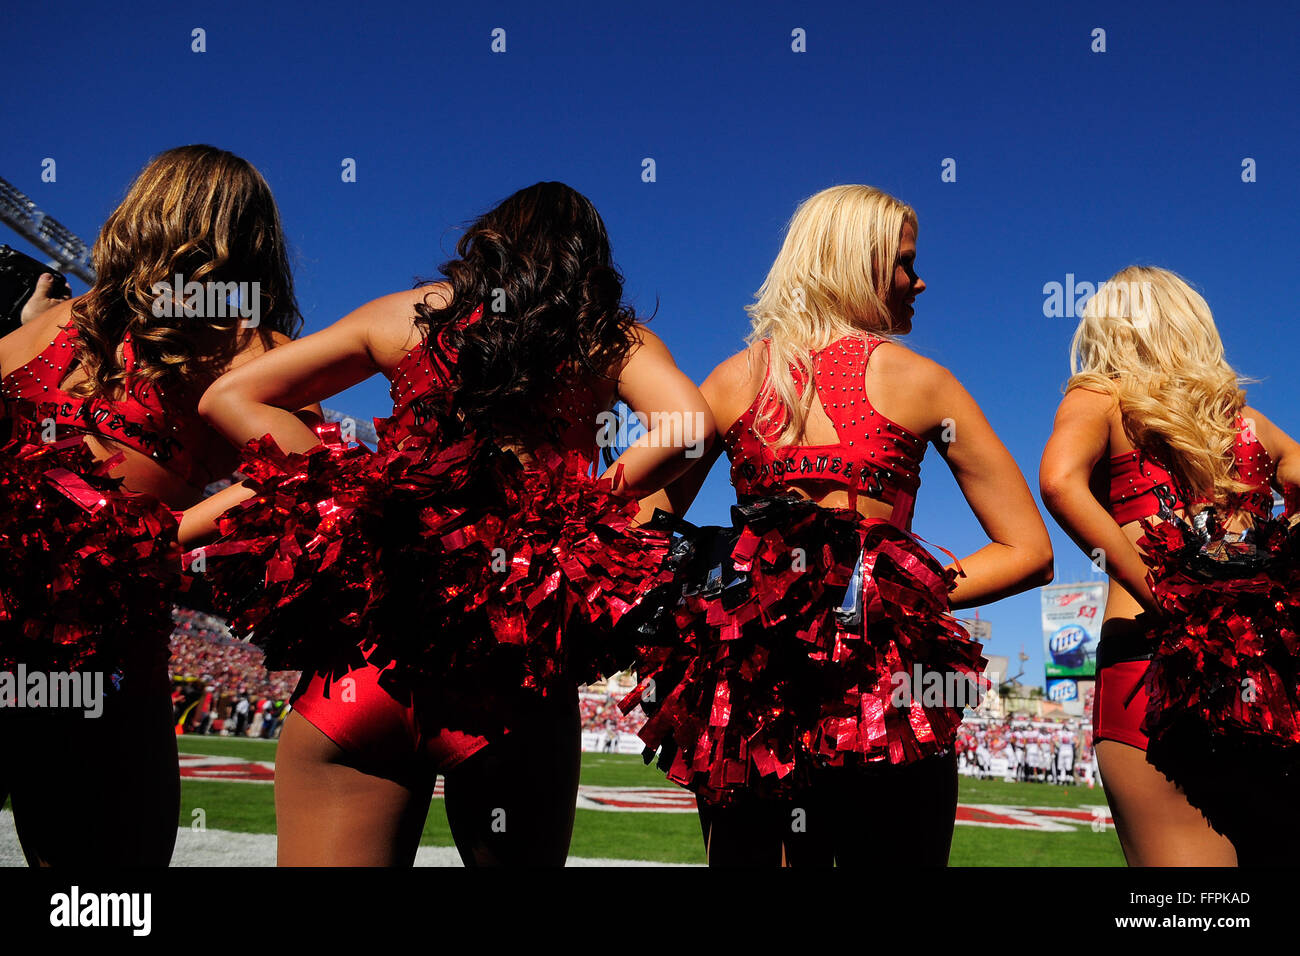 Tamap, Florida, USA. 25th Nov, 2012. Tampa Bay Buccaneers cheerleaders during the Bucs game against the Atlanta Falcons game at Raymond James on November 25, 2012 in Tampa, Florida. ZUMA Press/Scott A. Miller © Scott A. Miller/ZUMA Wire/Alamy Live News Stock Photo